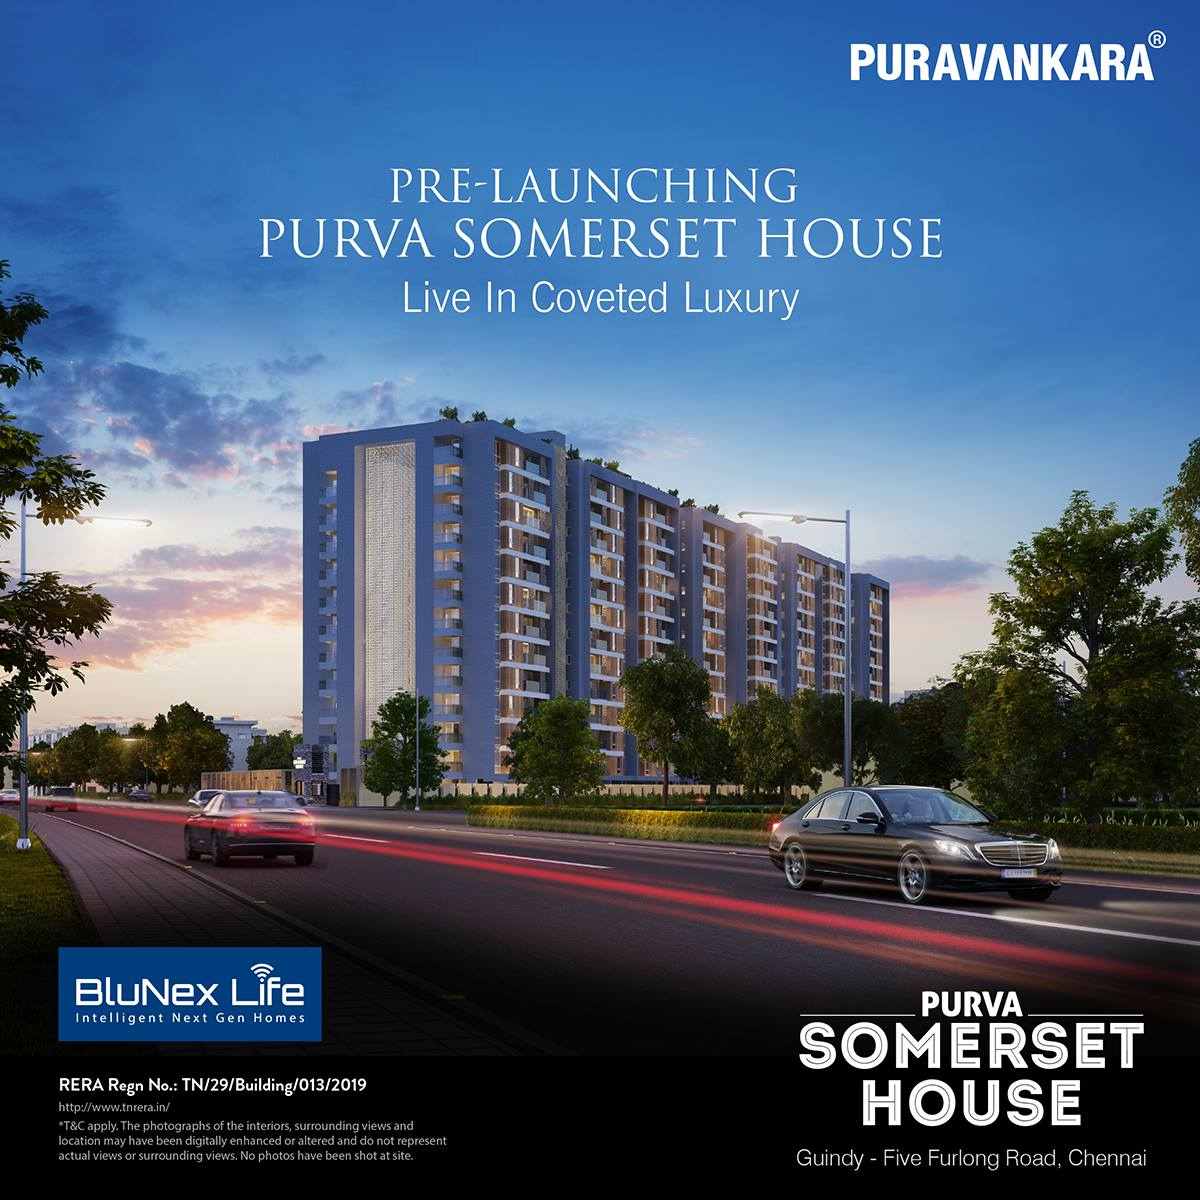 Live in coveted luxury at Purva Somerset House in Chennai Update